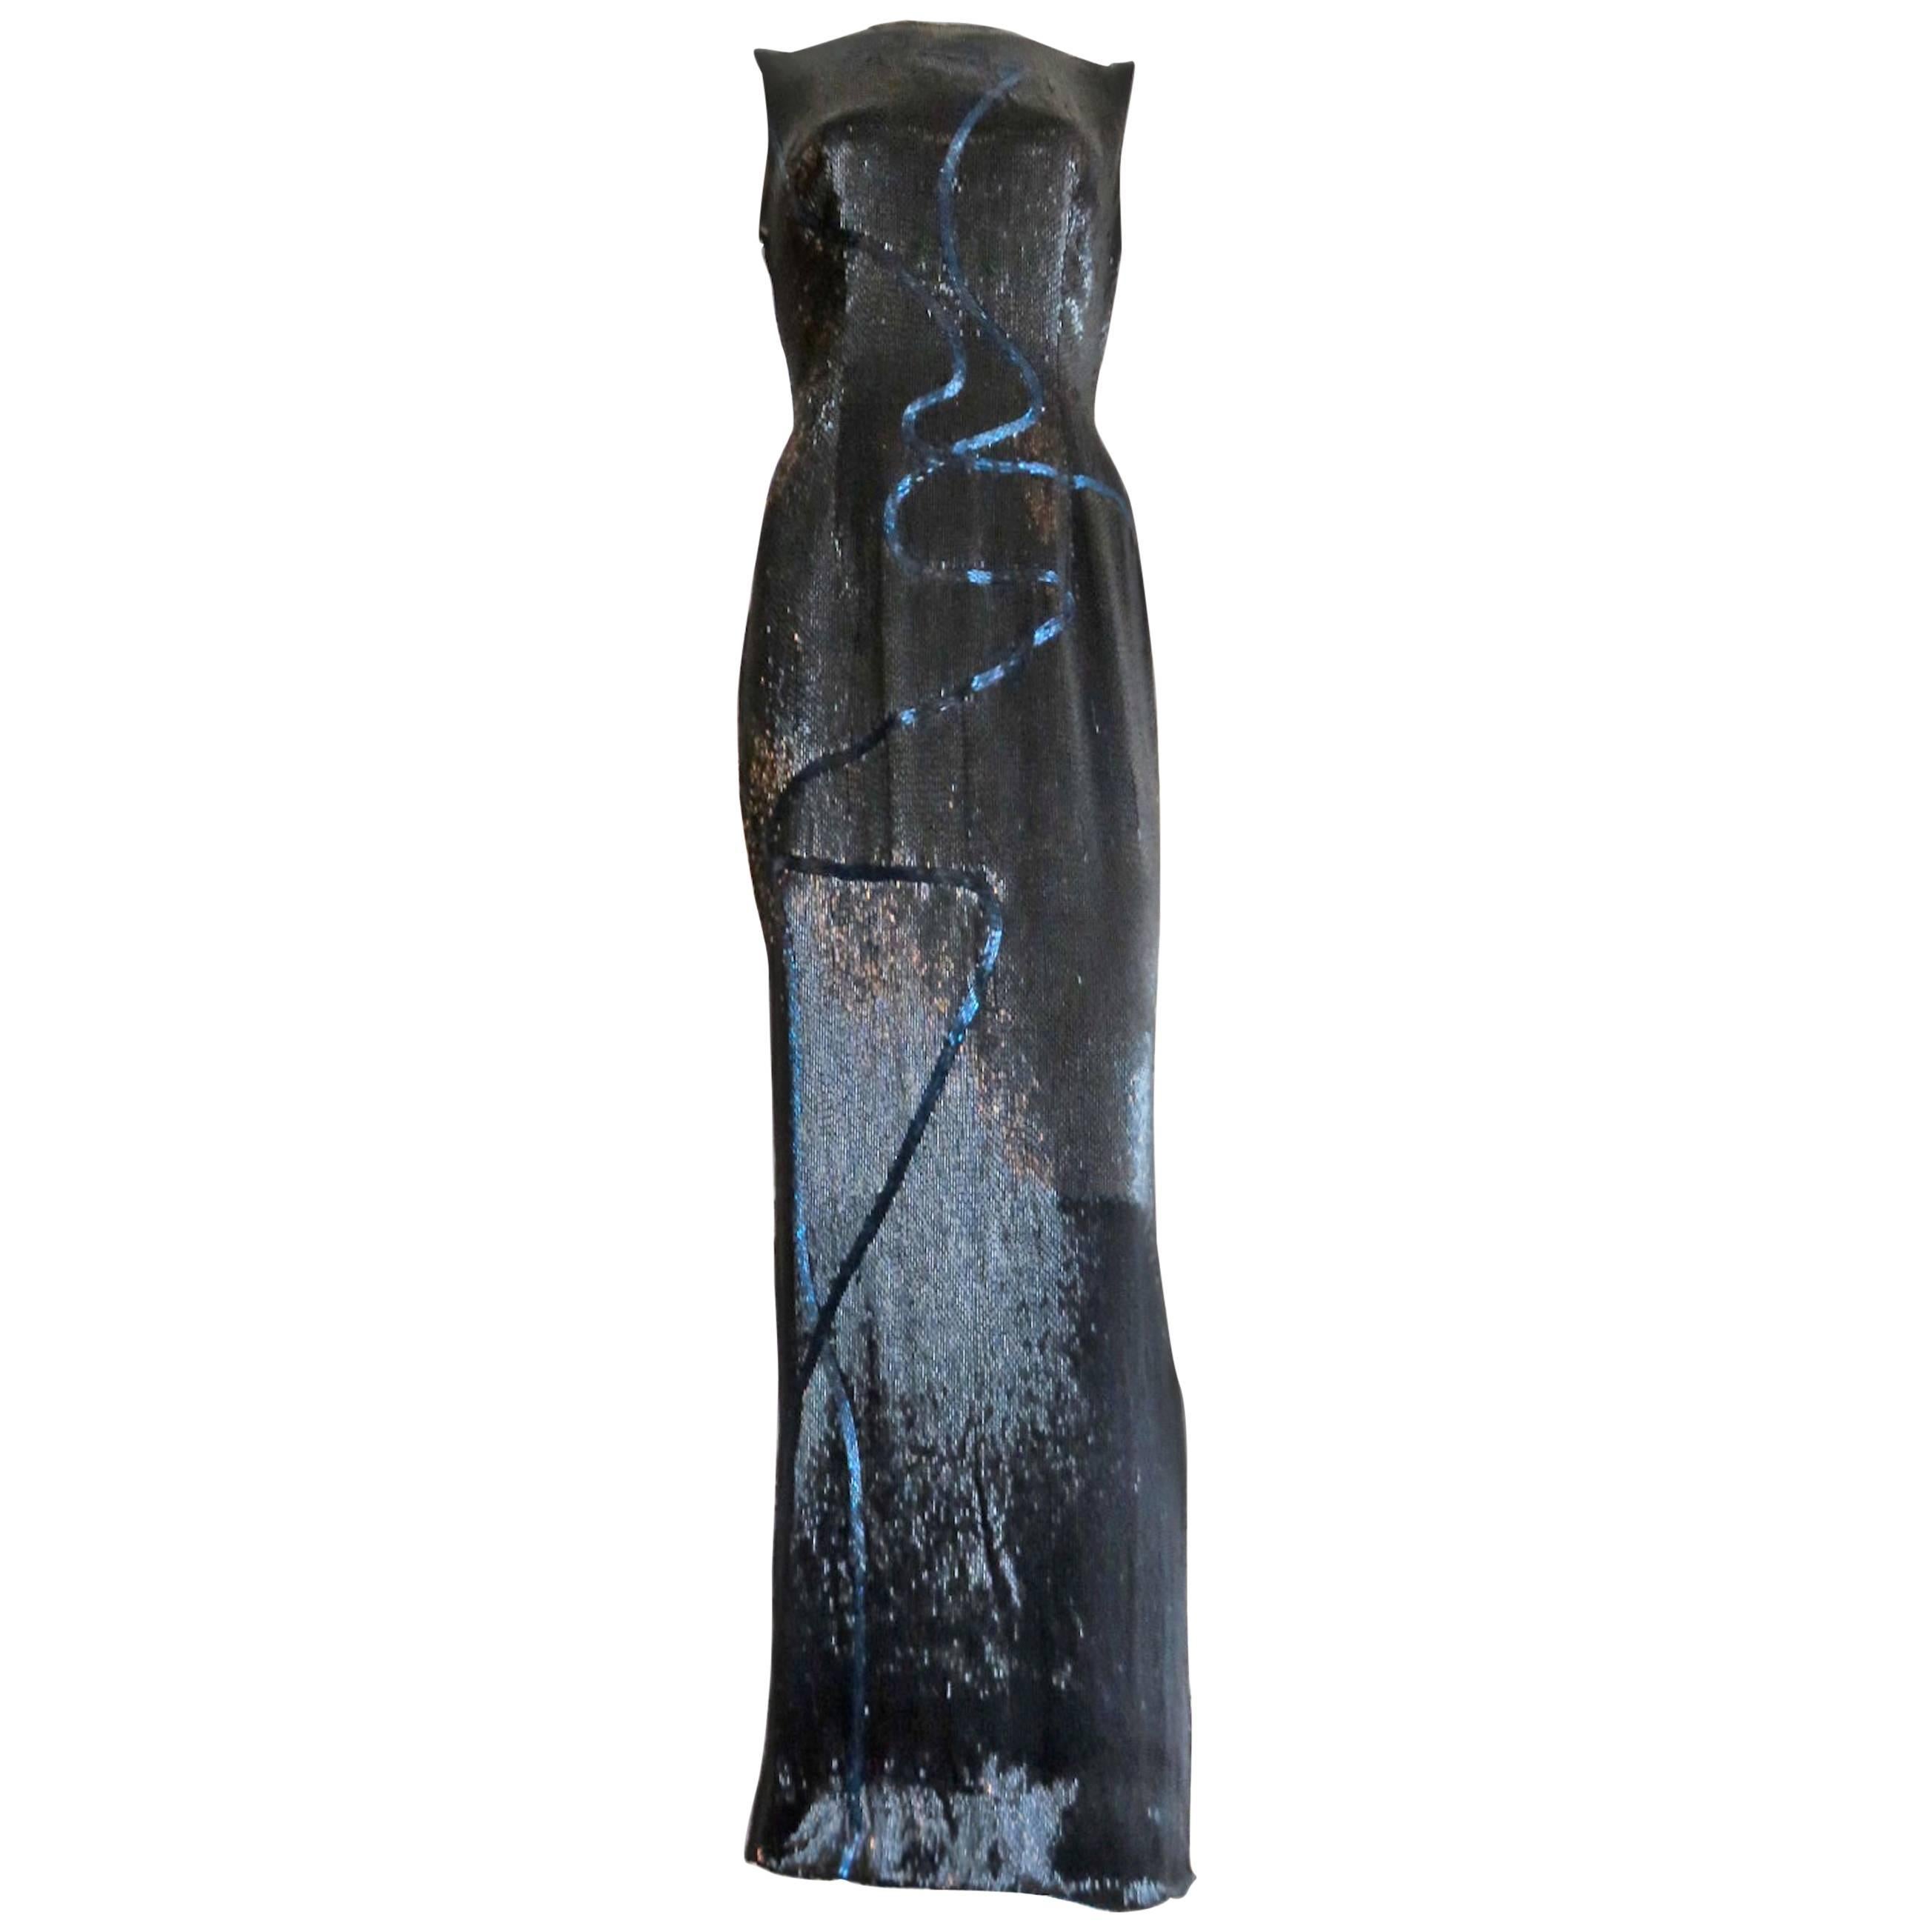 1998 ALEXANDER MCQUEEN for GIVENCHY COUTURE 'Blade Runner' Evening Gown For Sale